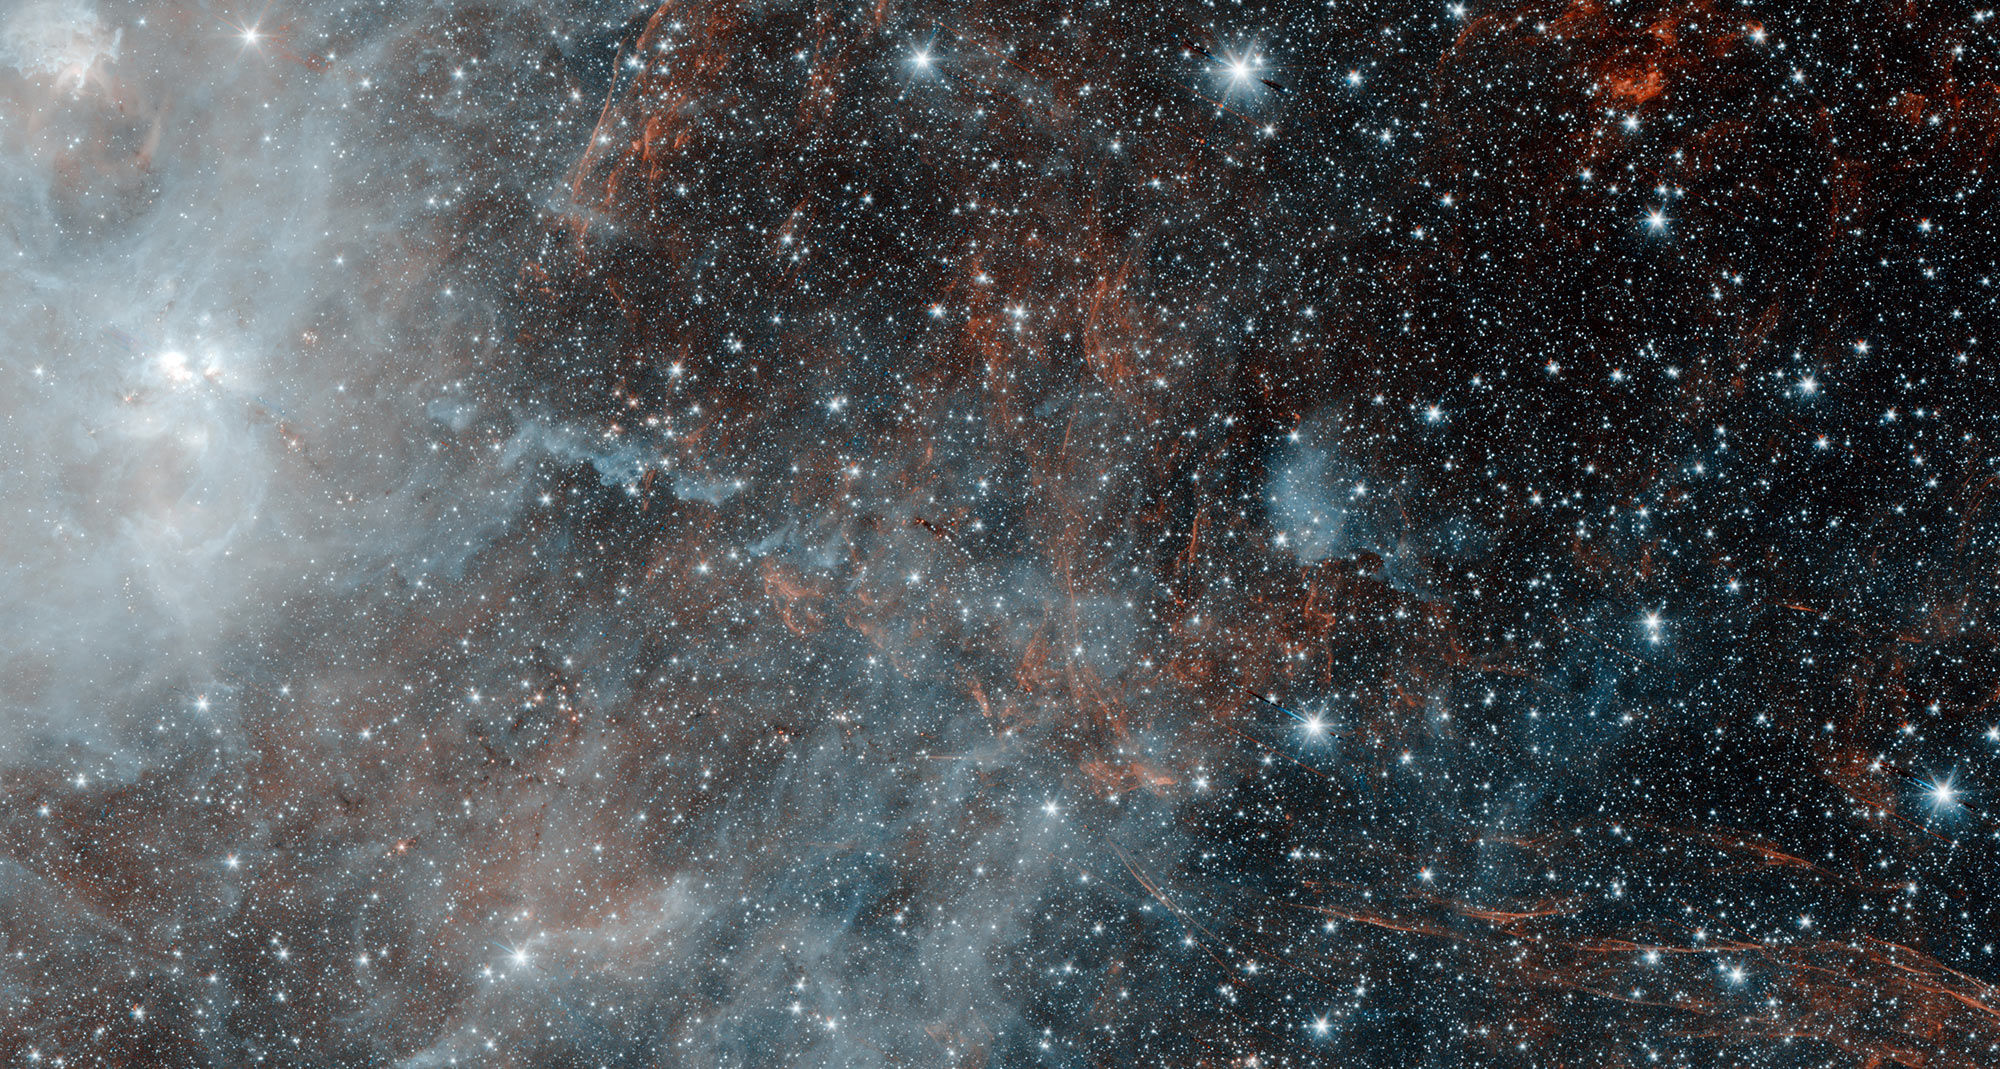 The supernova remnant HBH 3 can be seen as wispy red tendrils in this Spitzer Space Telescope image. The other objects are star forming regions. Credit: NASA/JPL-Caltech/IPAC